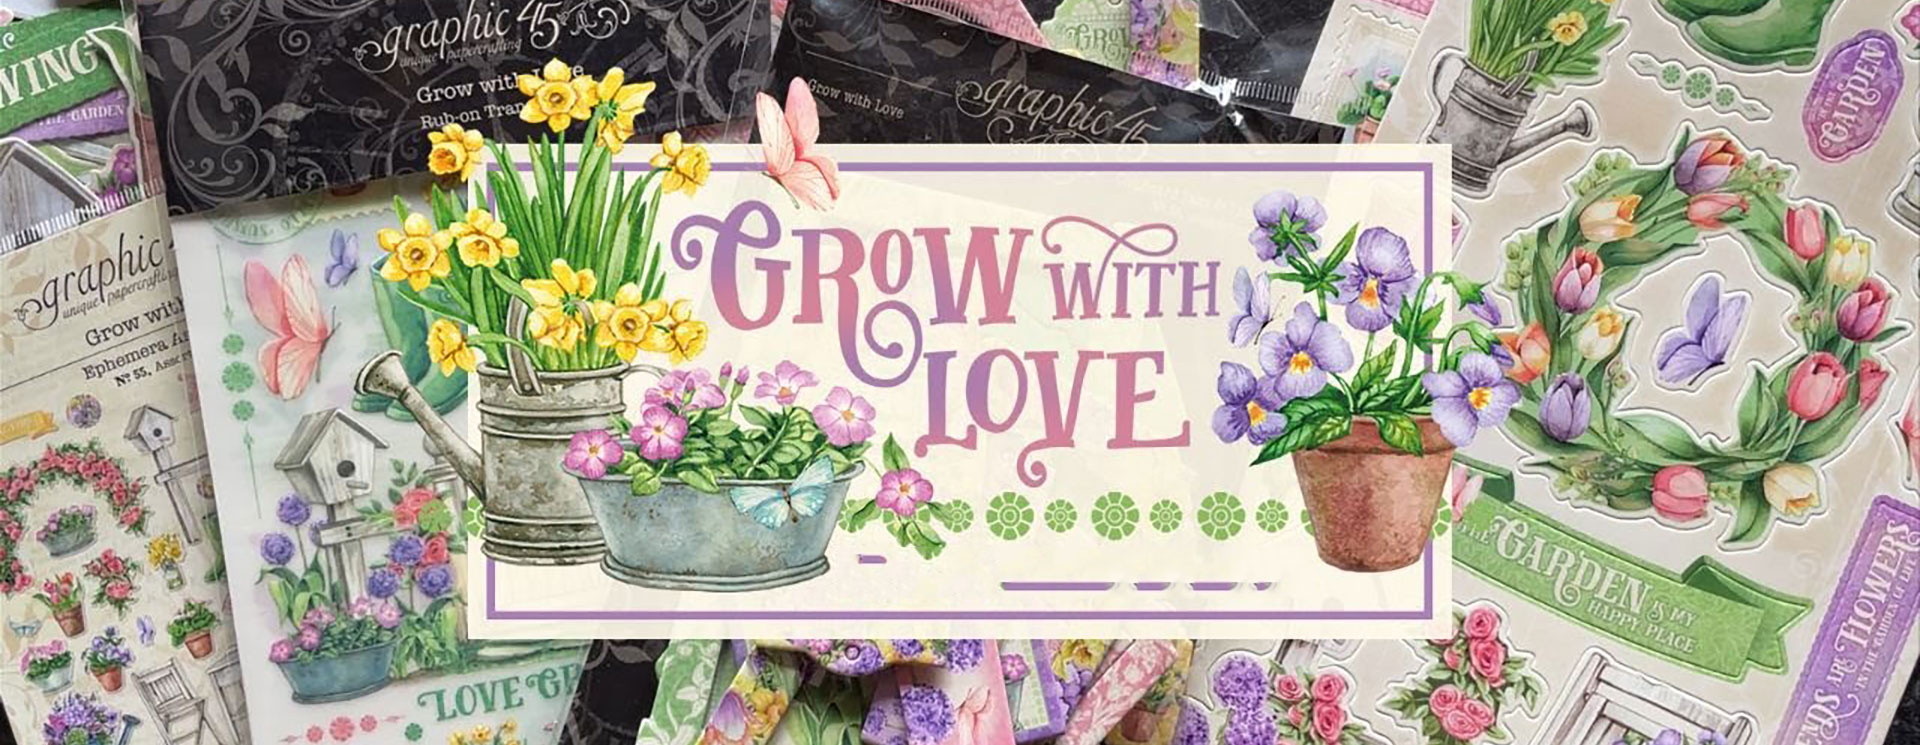 Graphic 45 : Grow with Love